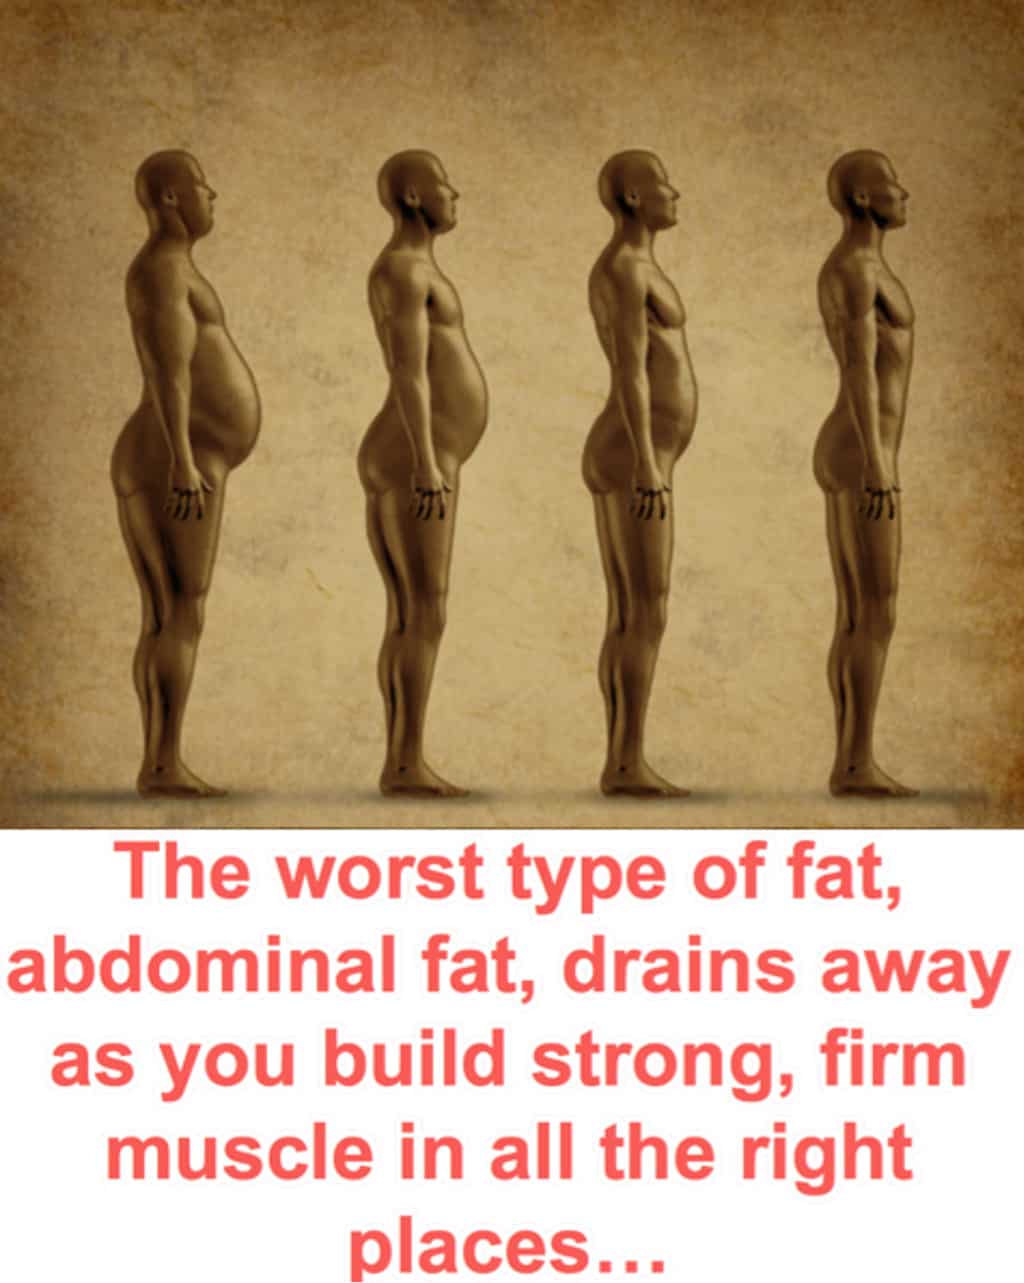 The worst type of fat, abdominal fat, drains away as you build strong, firm muscle in all the right places...